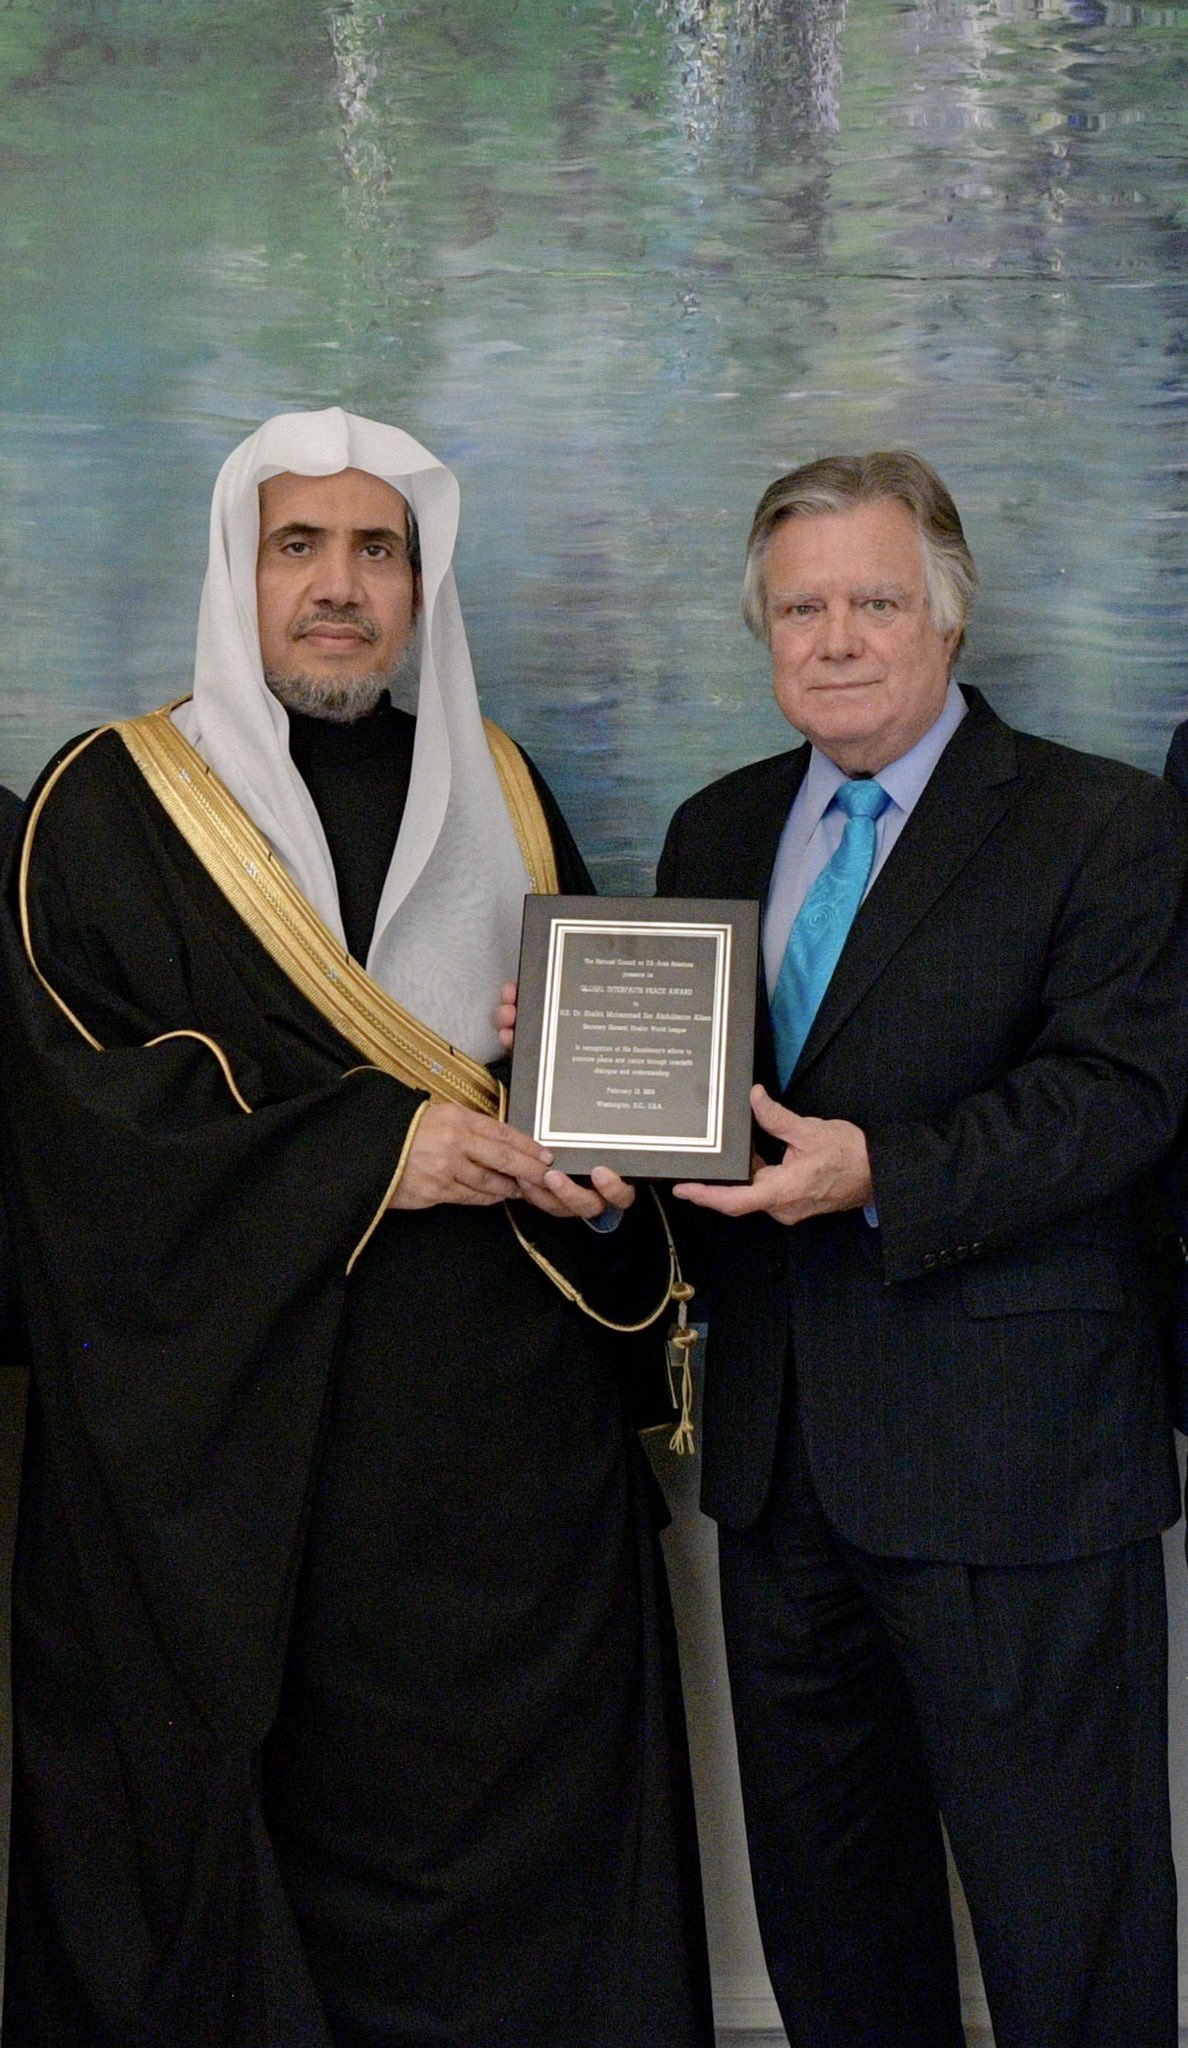 The National Council on U.S.-Arab Relations confers the World Peace among Religions Award on HE Sheikh Dr. Mohammad Alissa